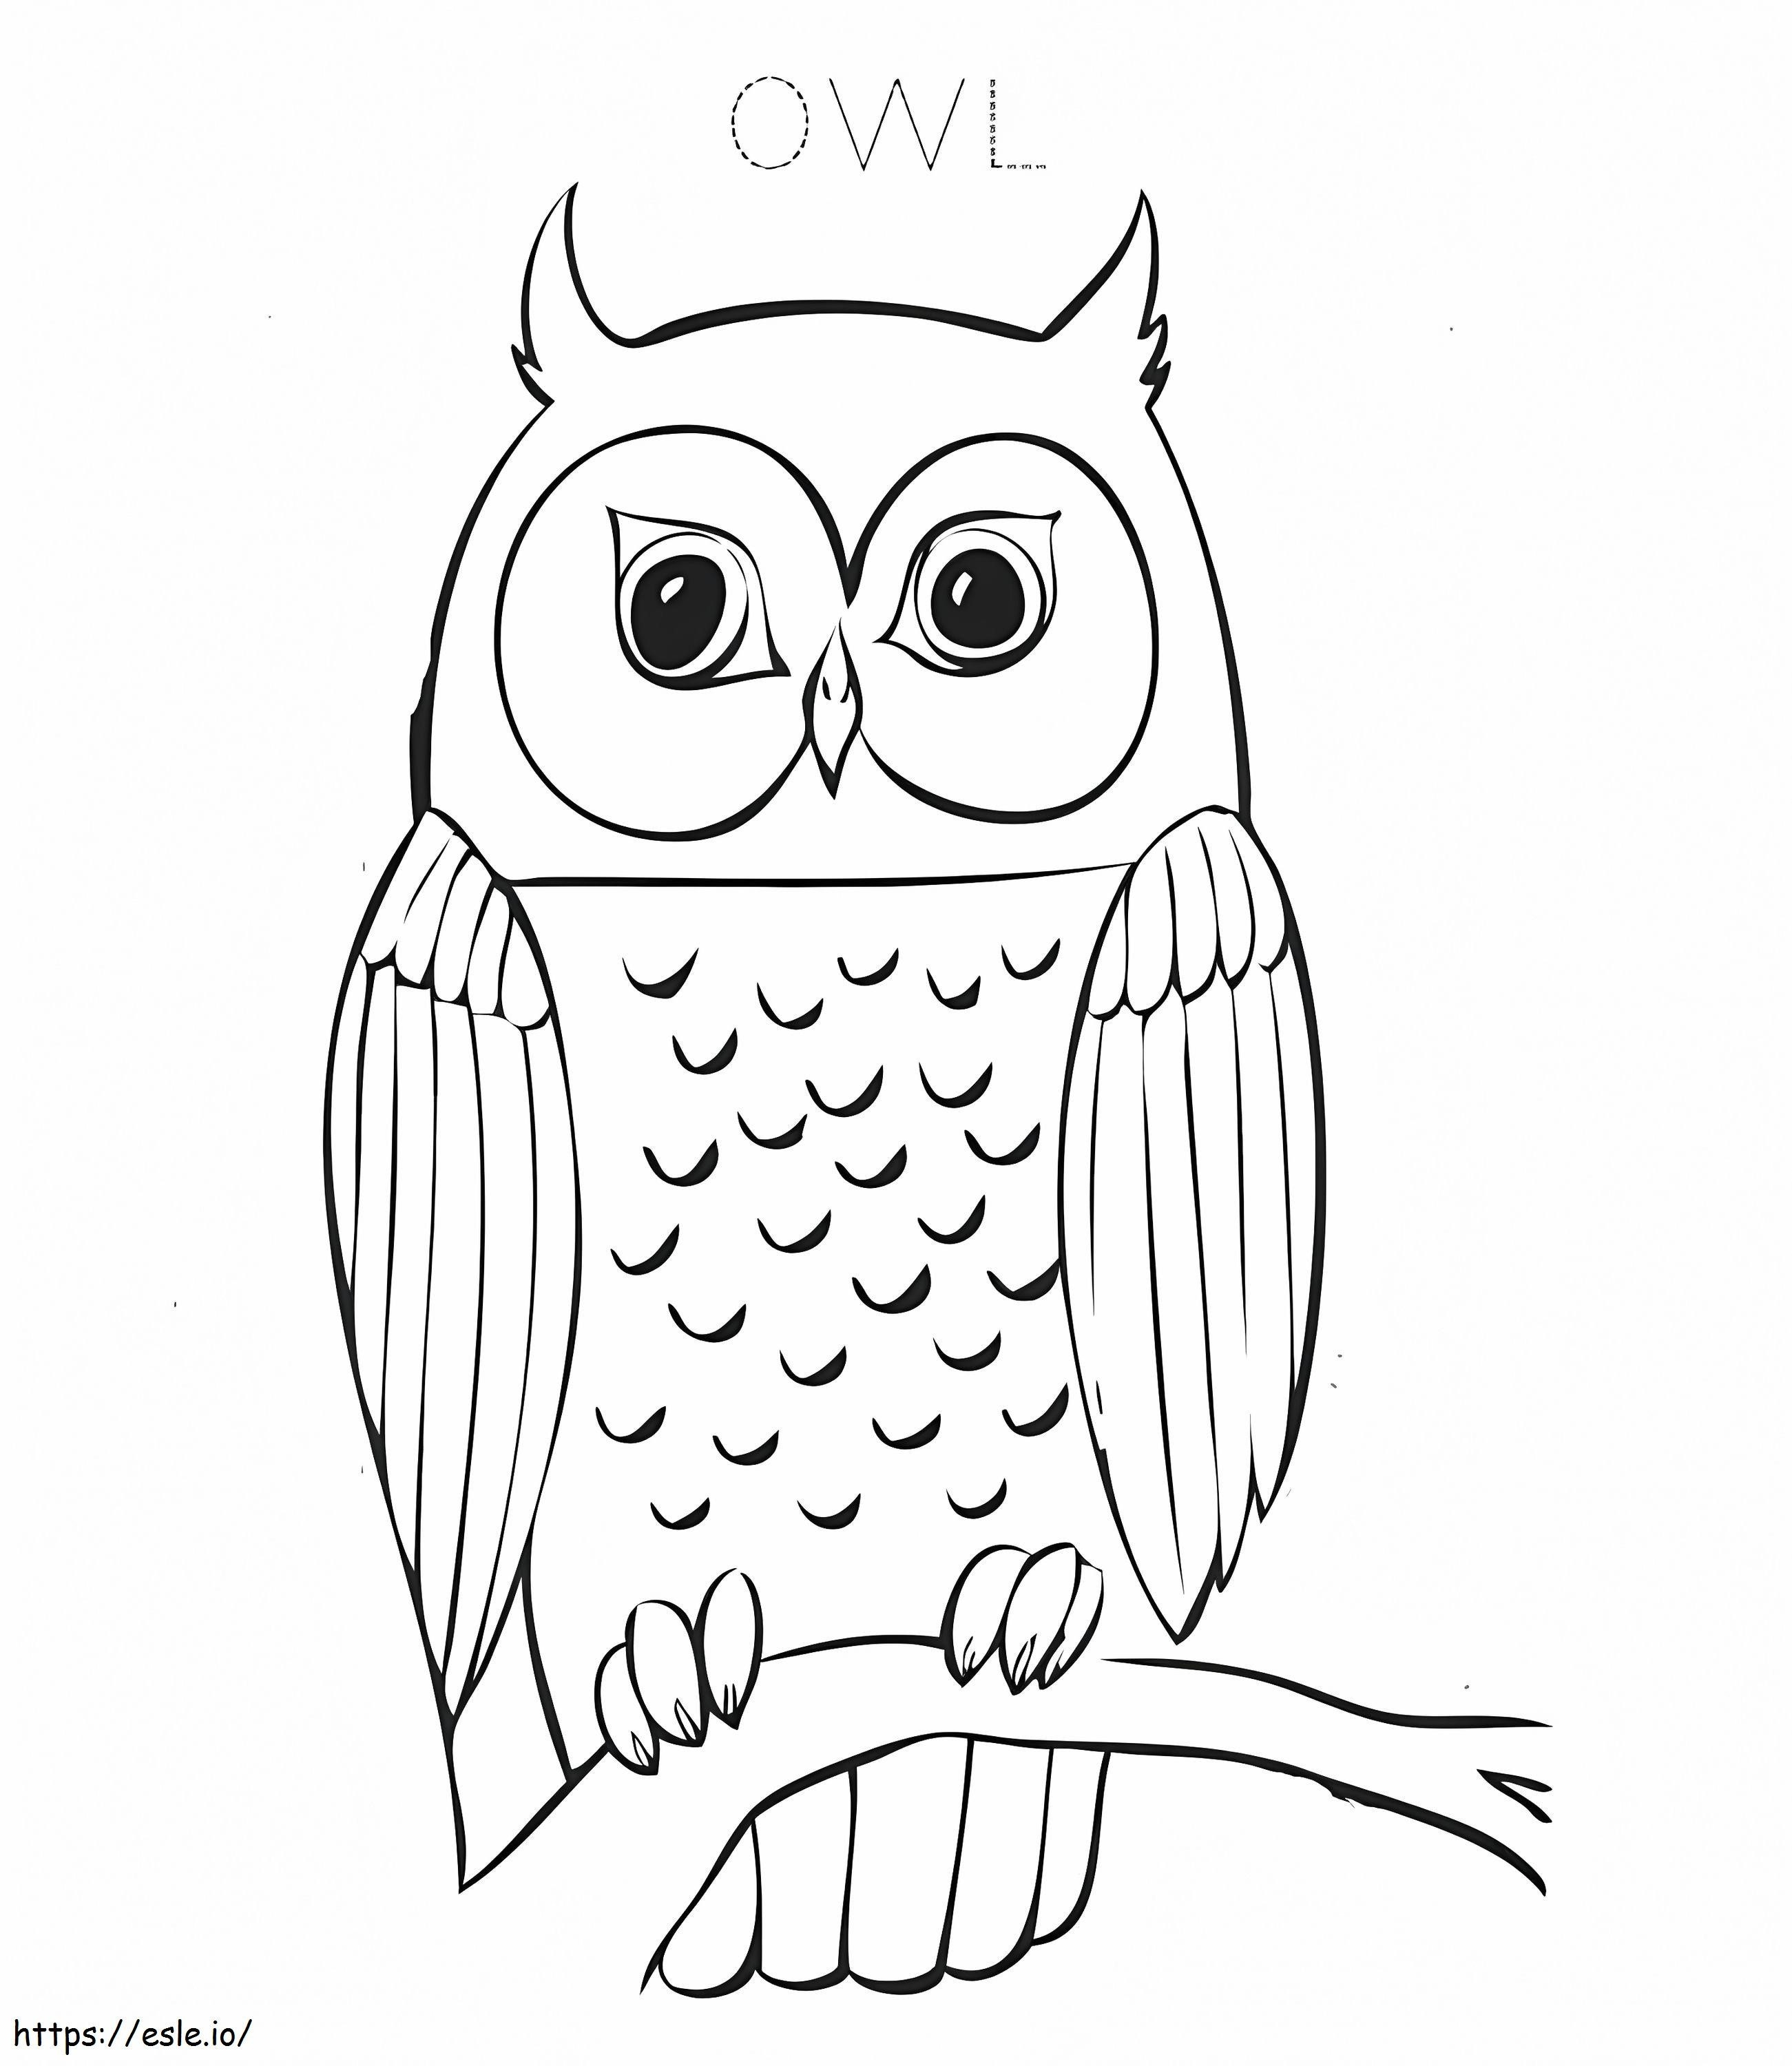 Nice Owl coloring page